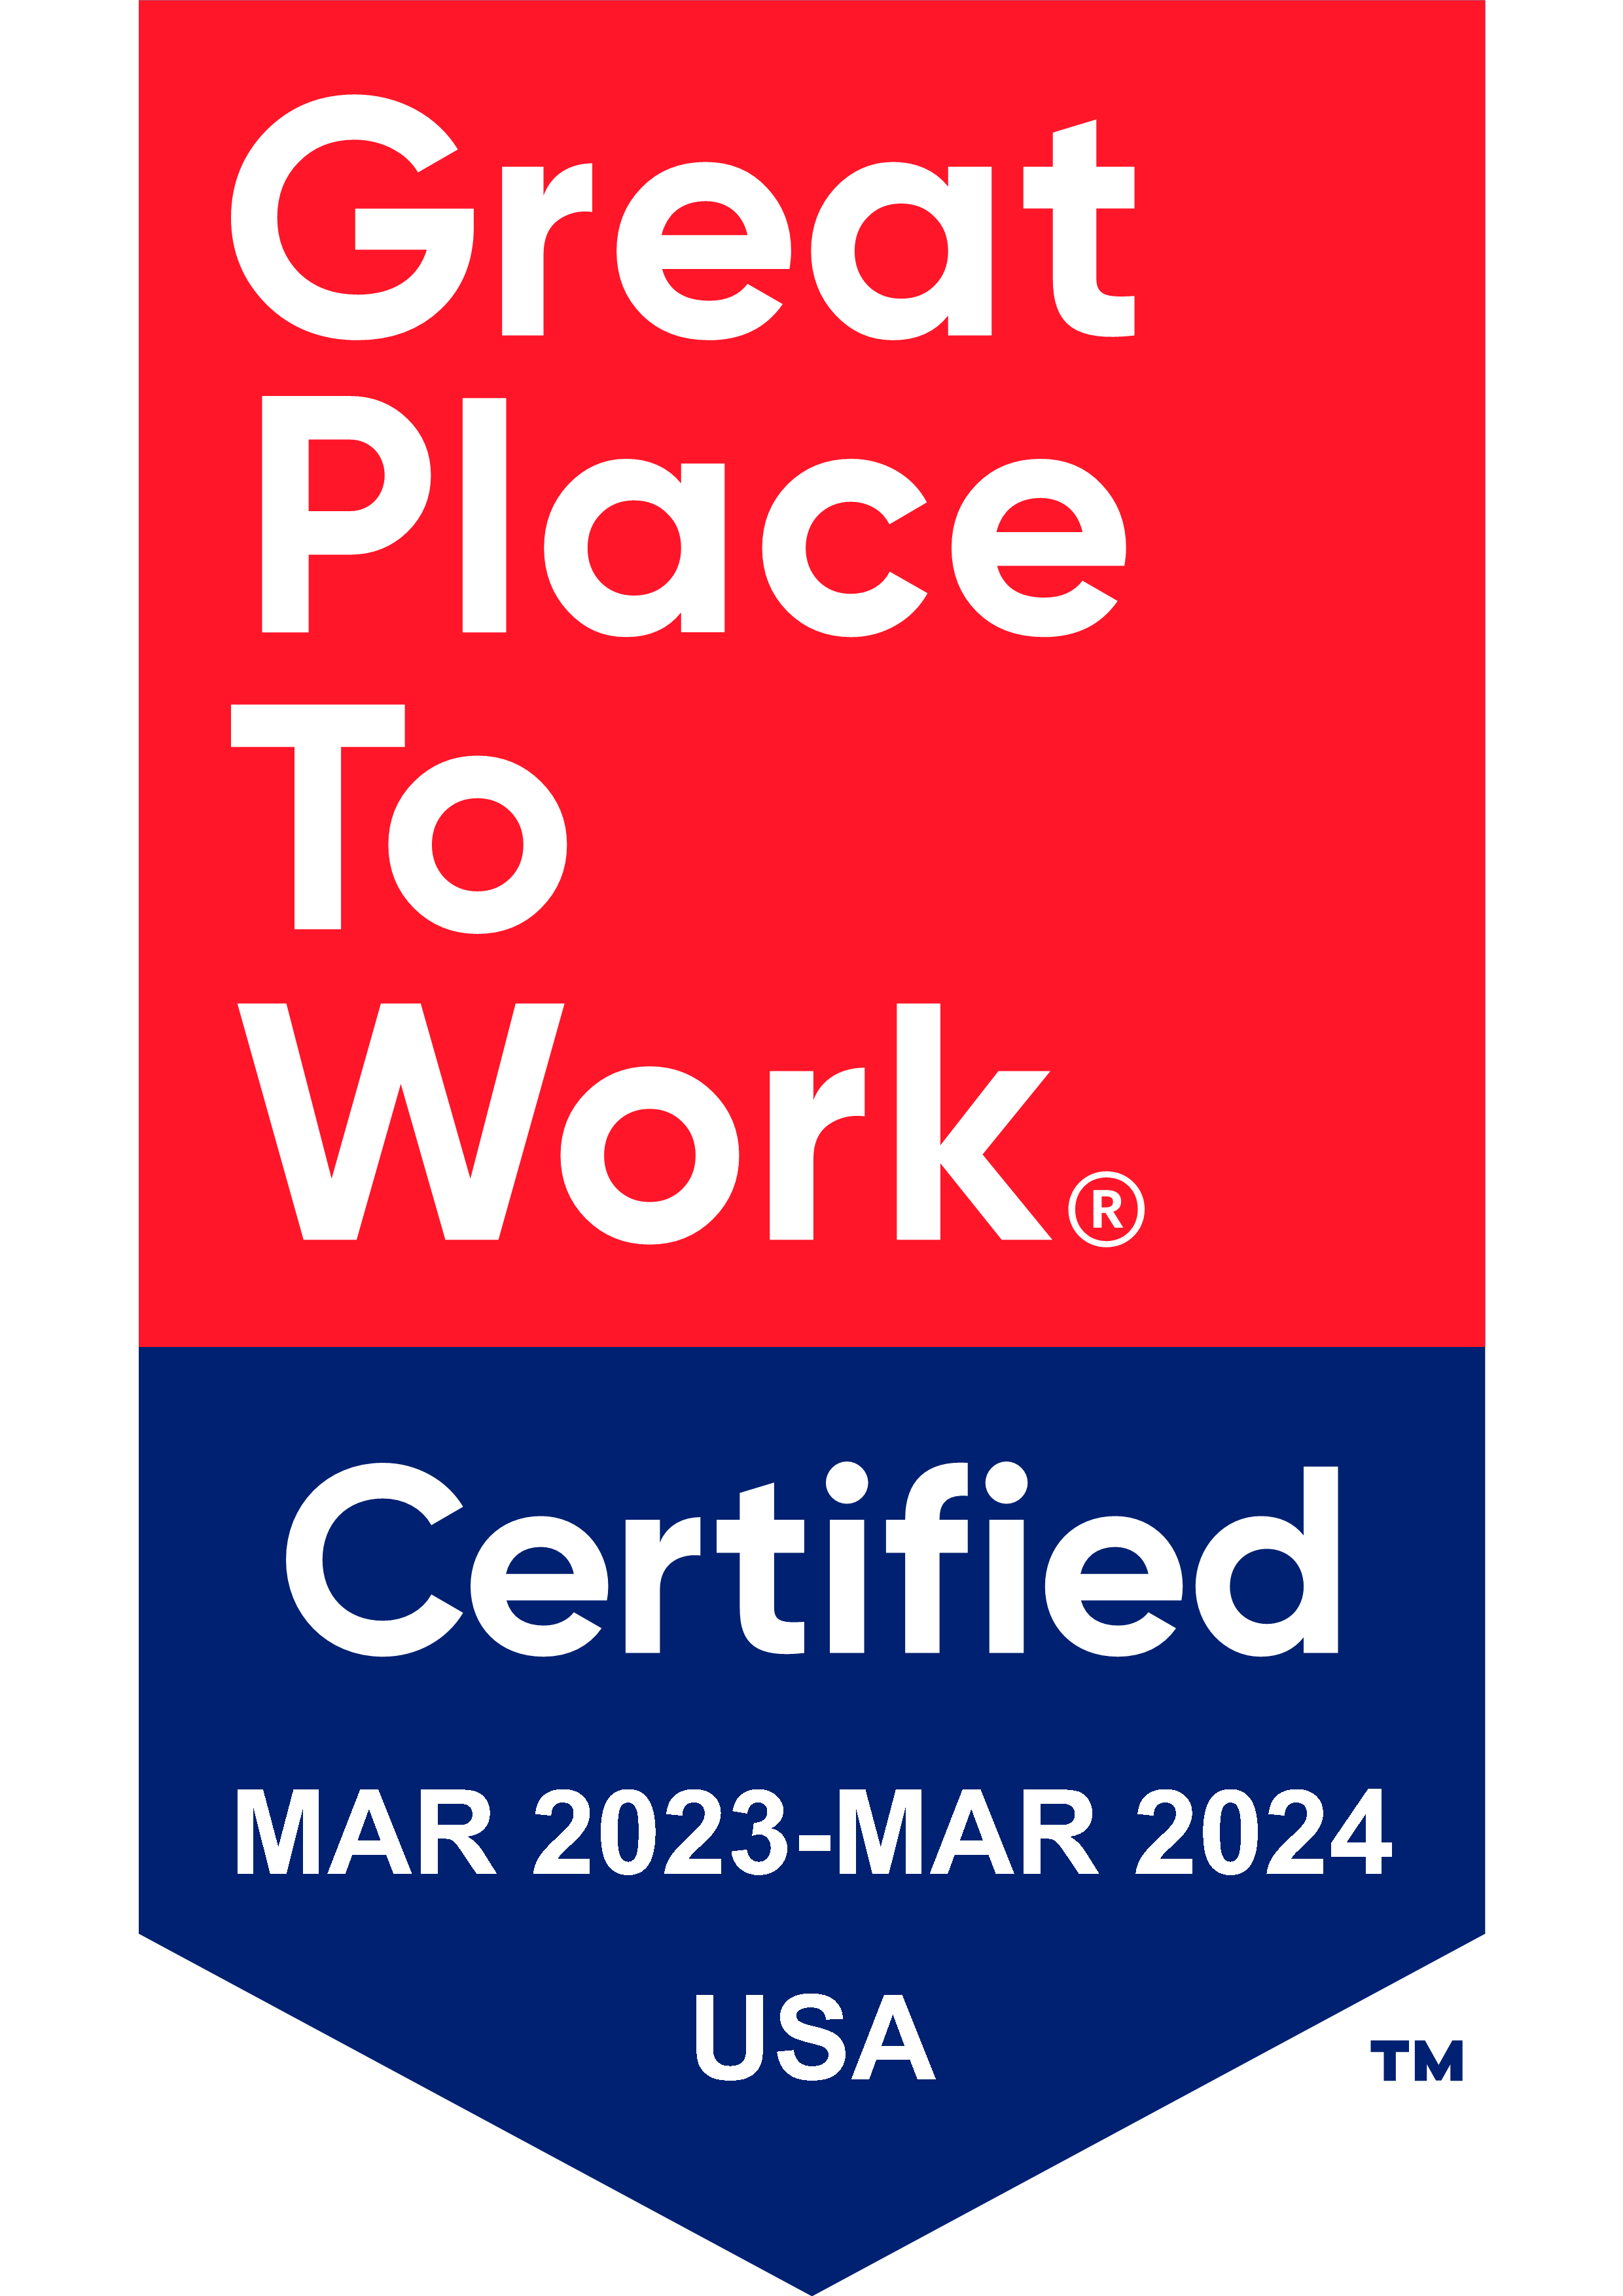 Great places to Work 2017 to 2023 certification.